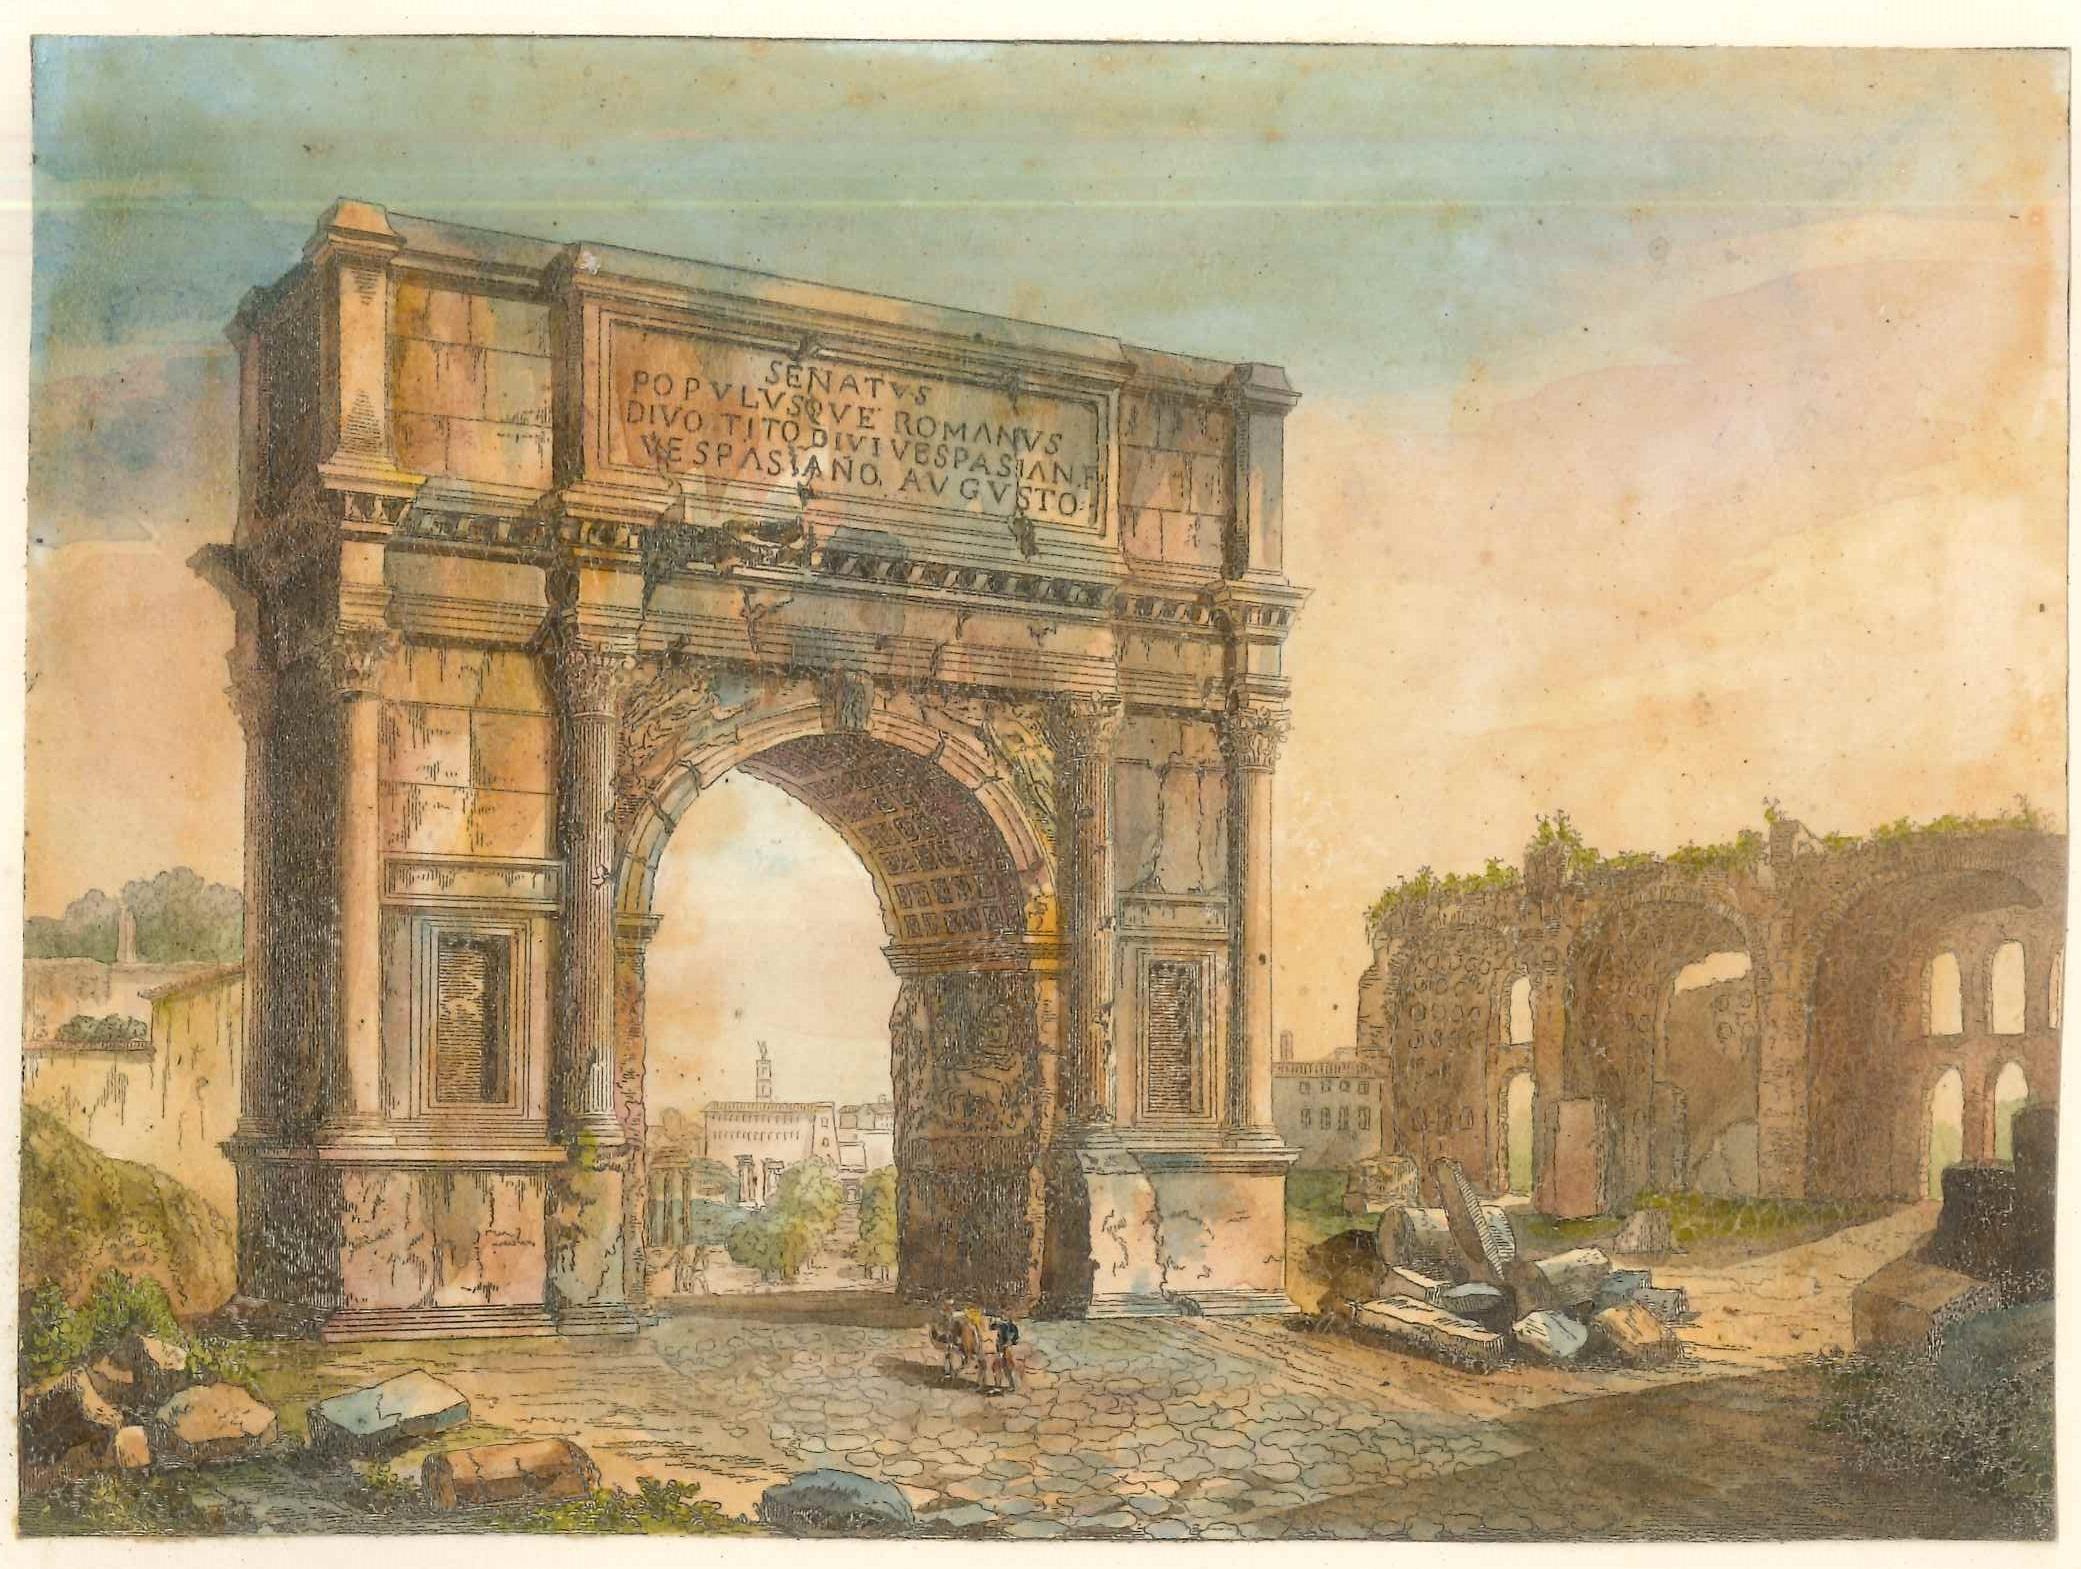 Triumphal Arches - Original Lithographs and Watercolors - Mid 19th Century